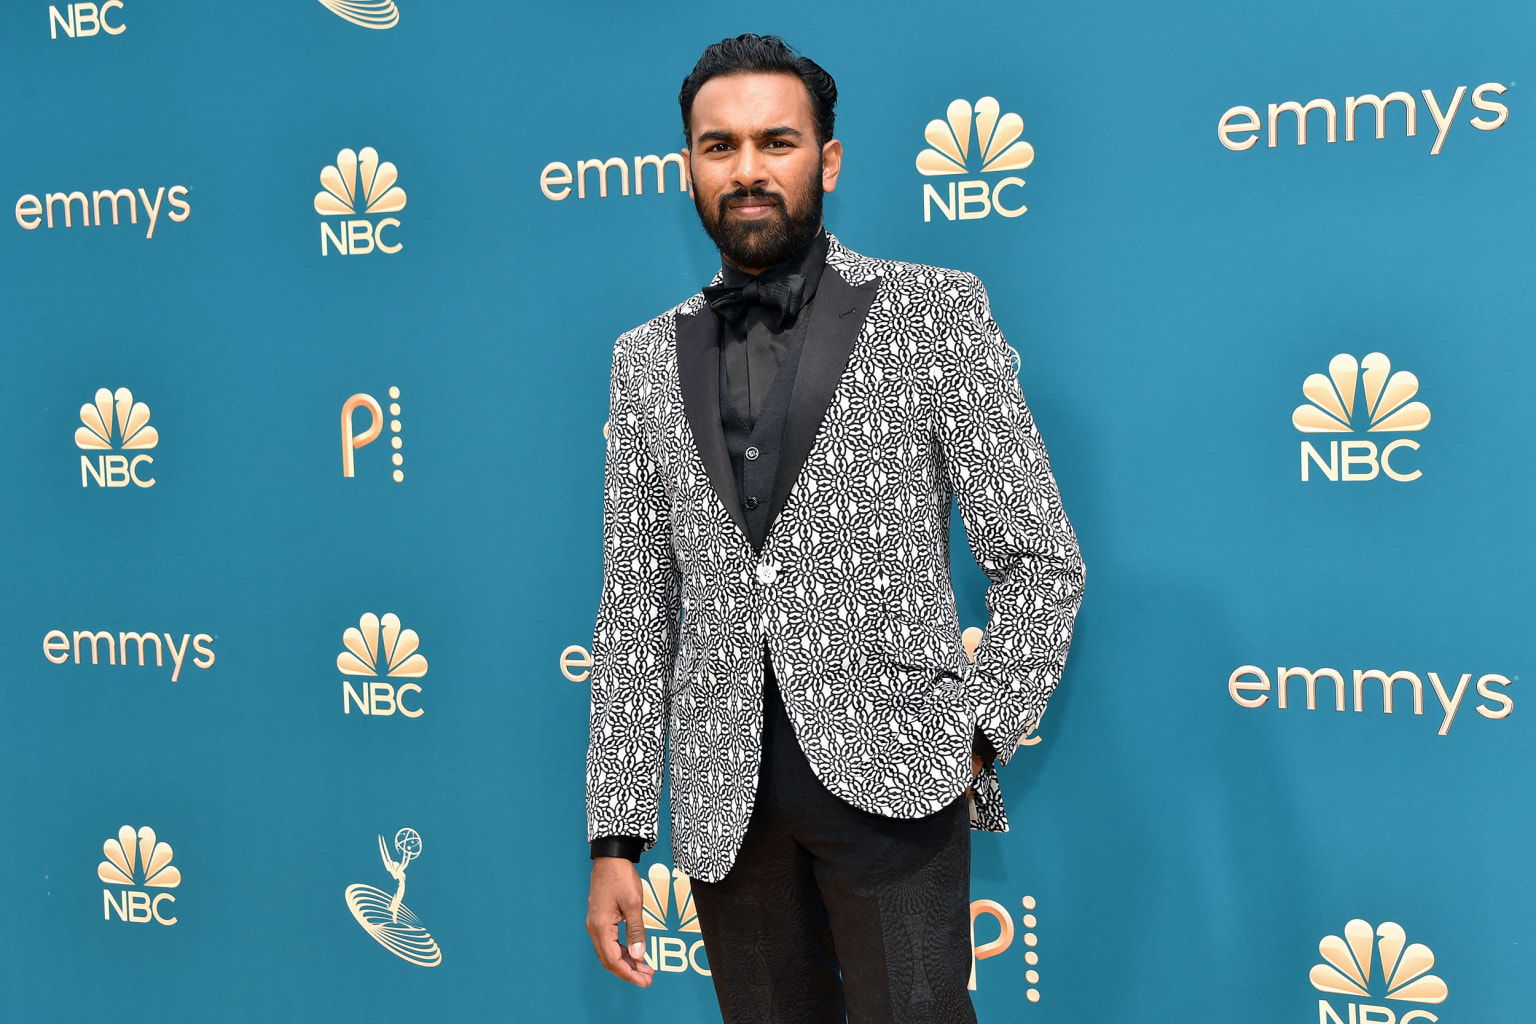 British actor Himesh Patel, nominated for his role in "Station Eleven," wore a patterned tuxedo jacket with an otherwise all-black ensemble. 